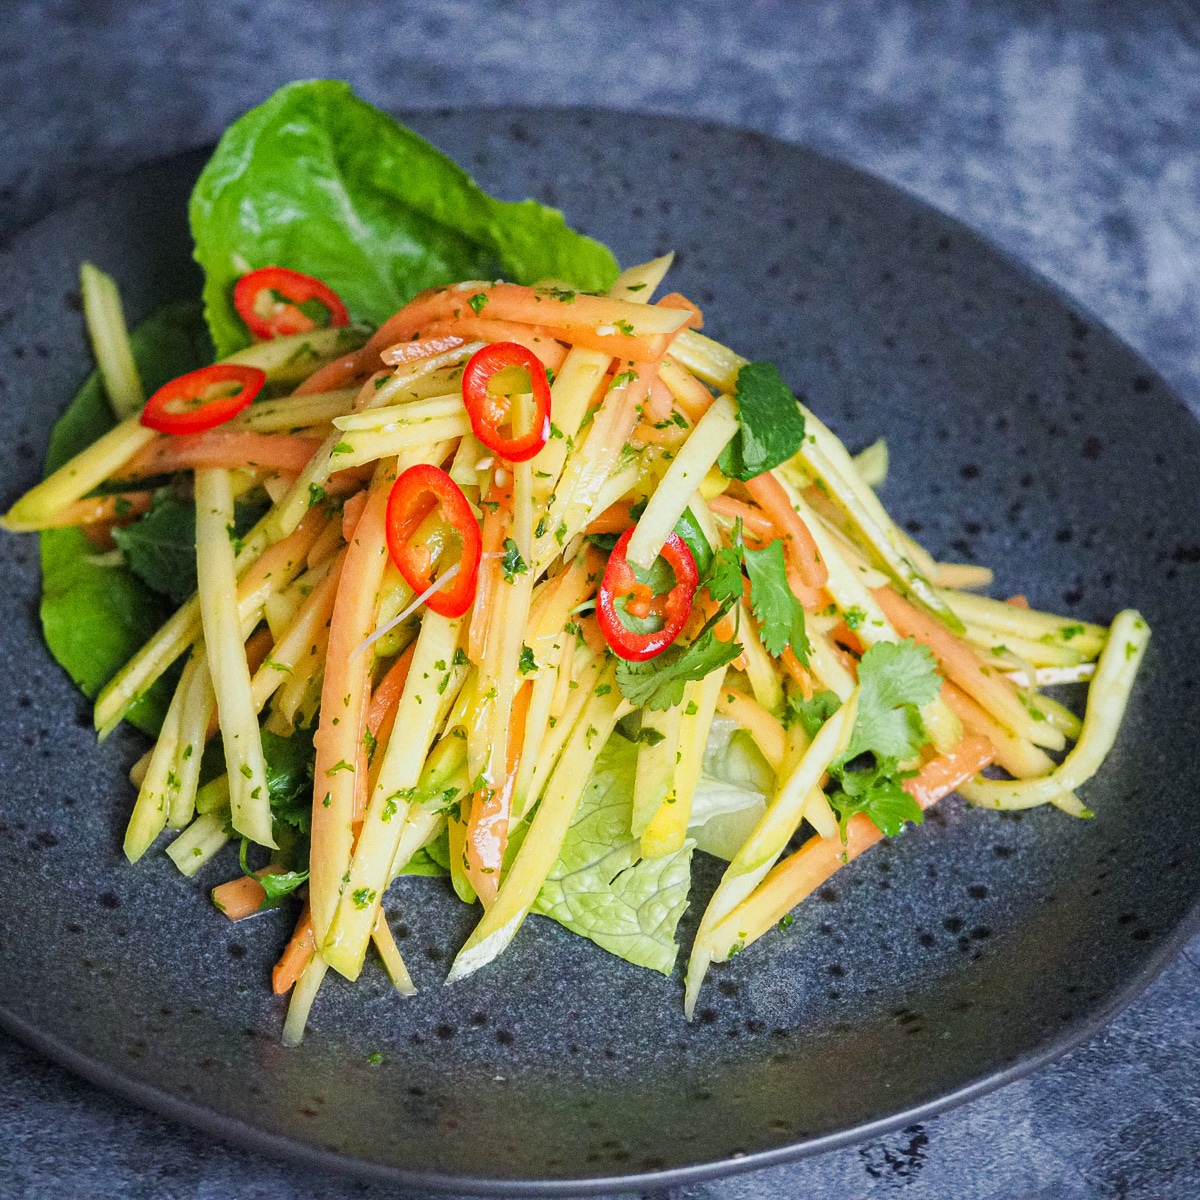 Thin slices of mango and papaya salad over romaine lettuce and garnished with slices of red chillies and cilantro in a grey plate with black dots placed on top of a grey-white counter top.